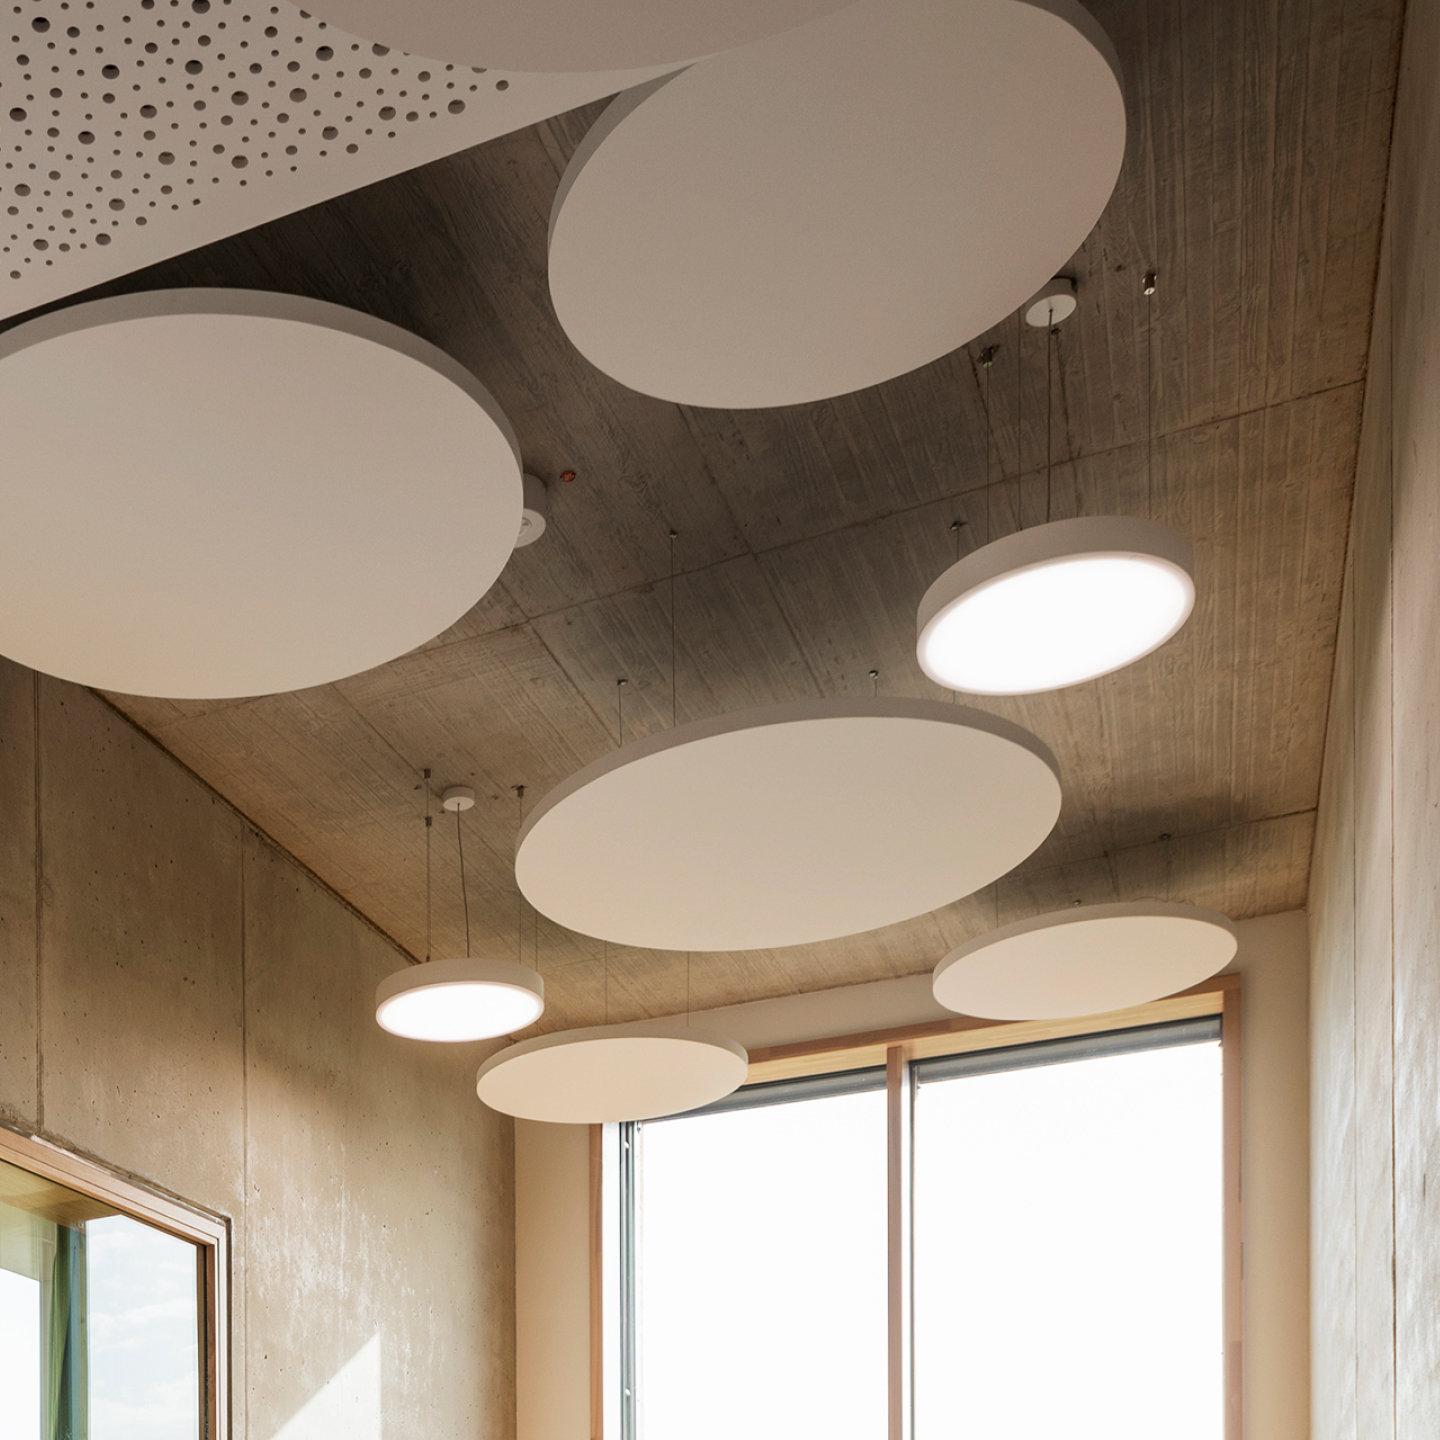 Bring character to your modern office design with Rockfon Eclipse Customised acoustic islands